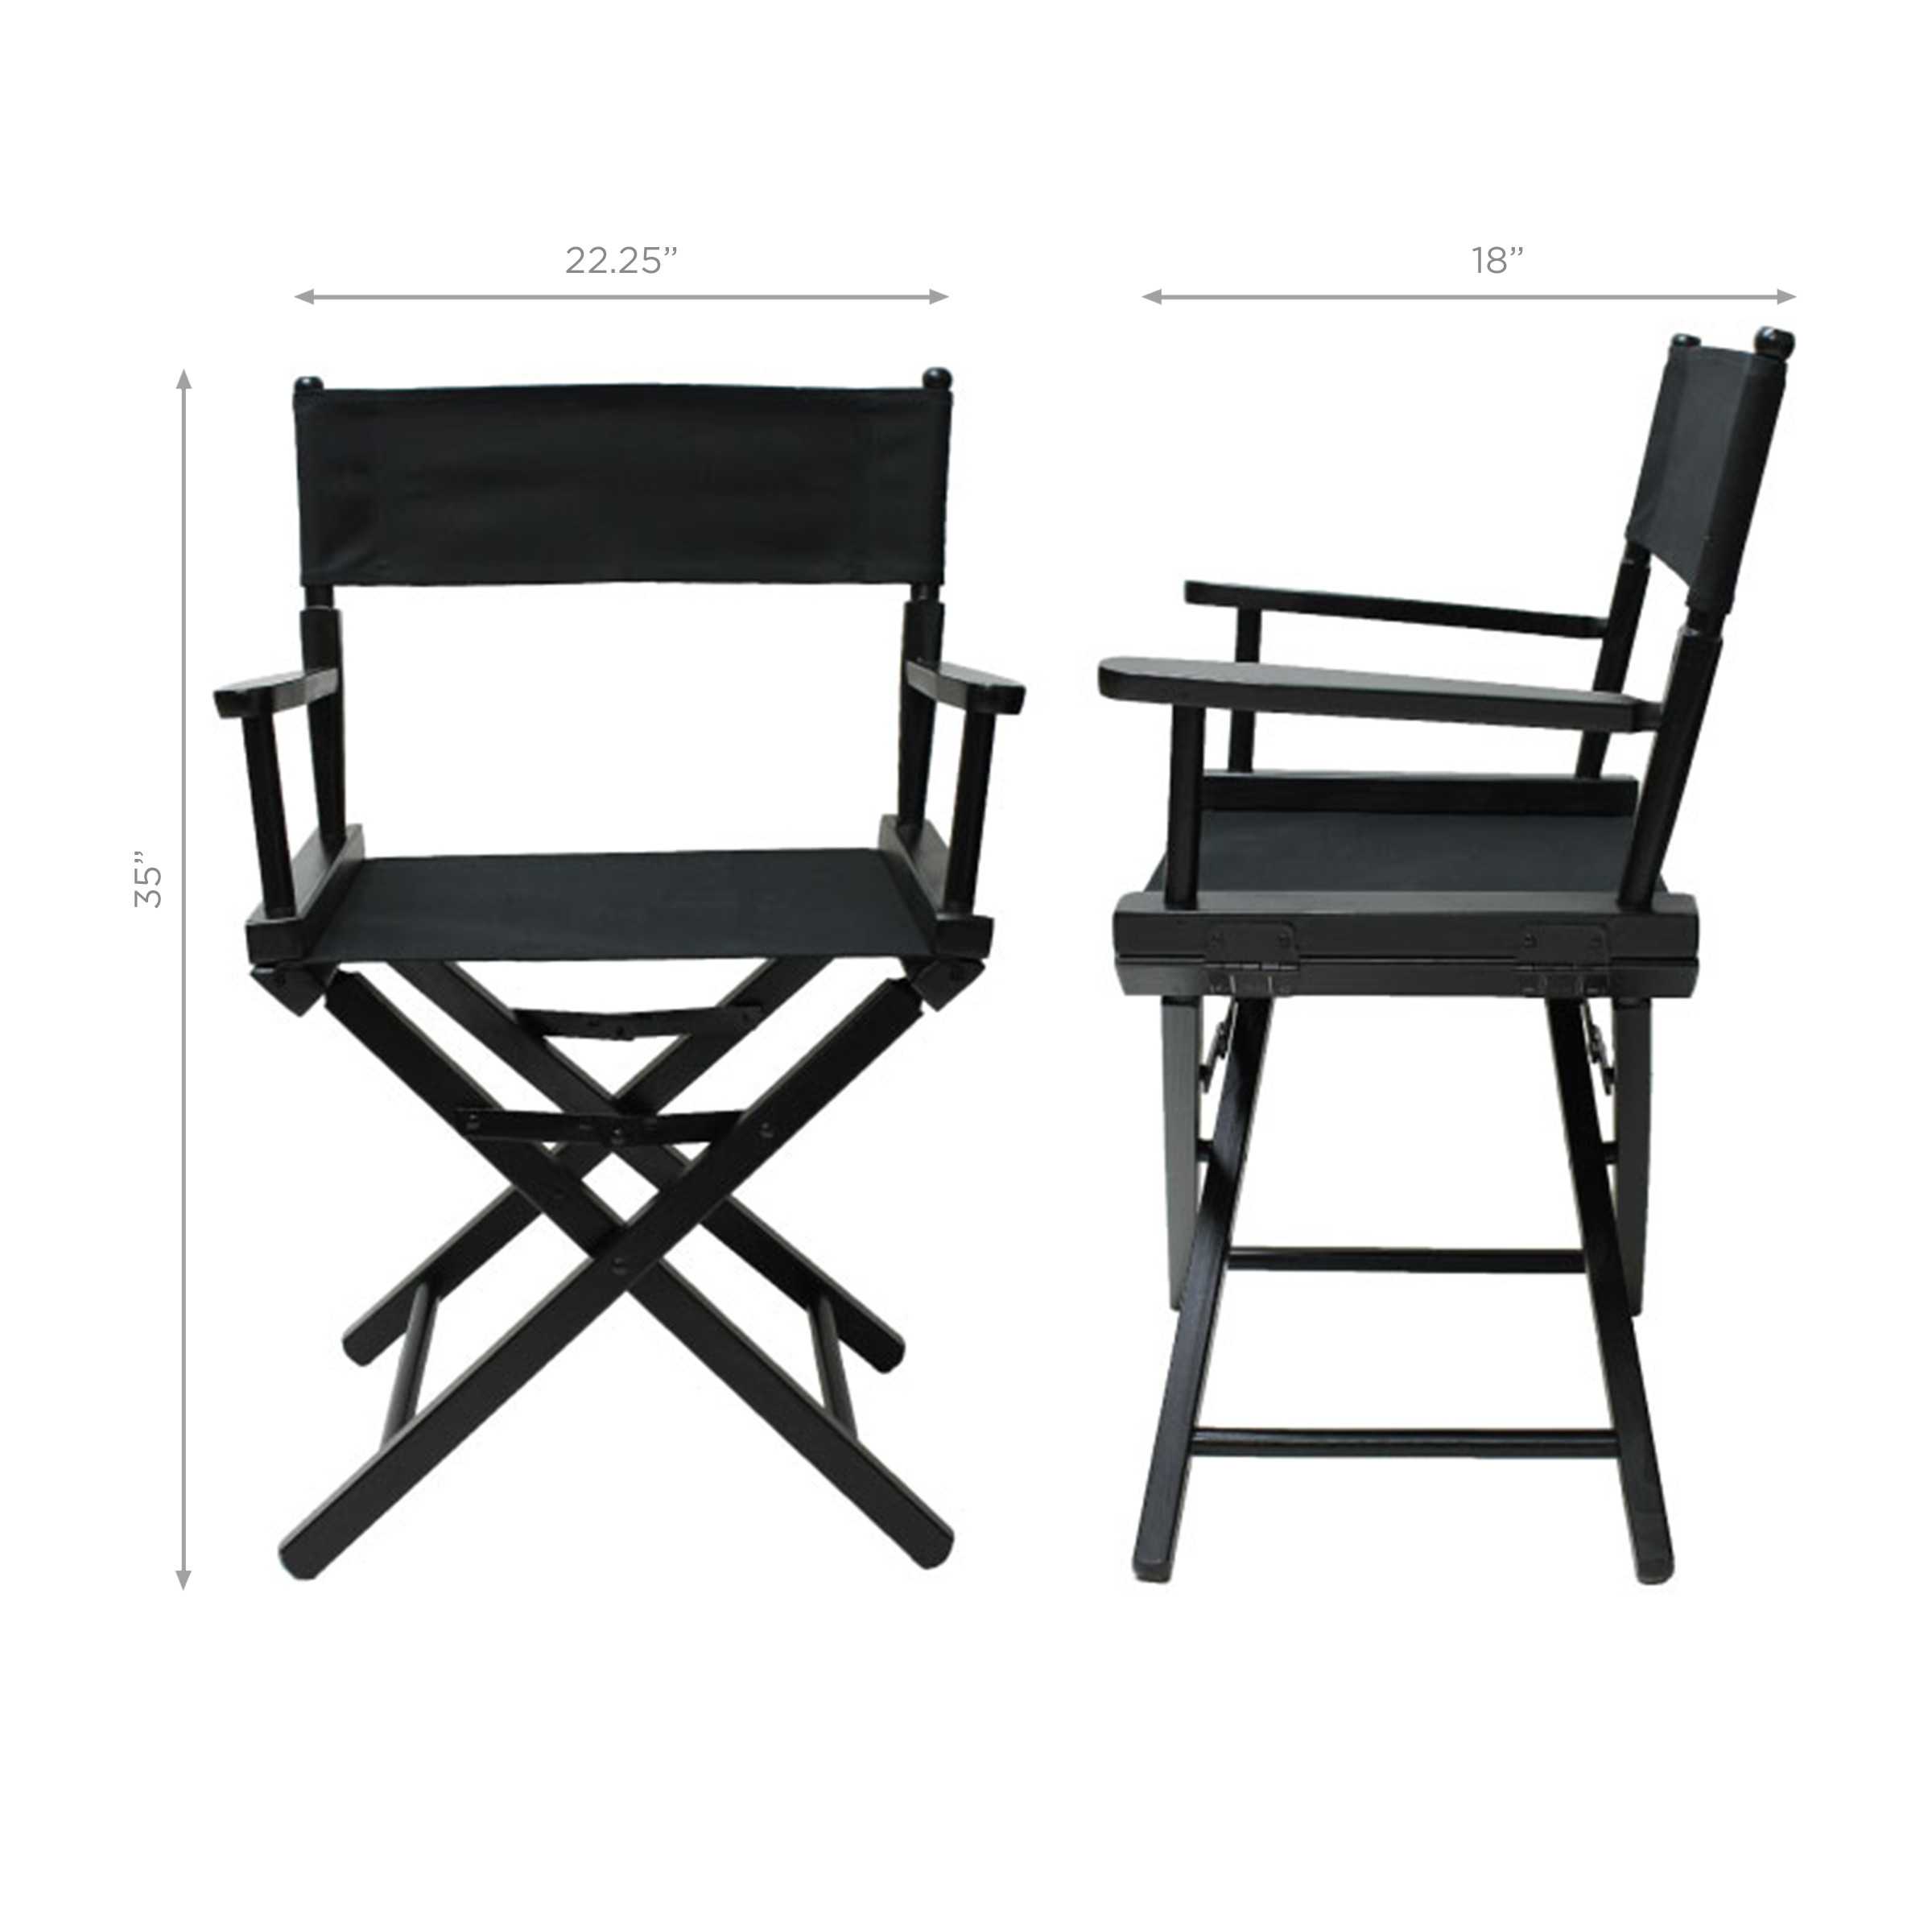 CHICAGO BEARS TABLE HEIGHT DIRECTORS CHAIR